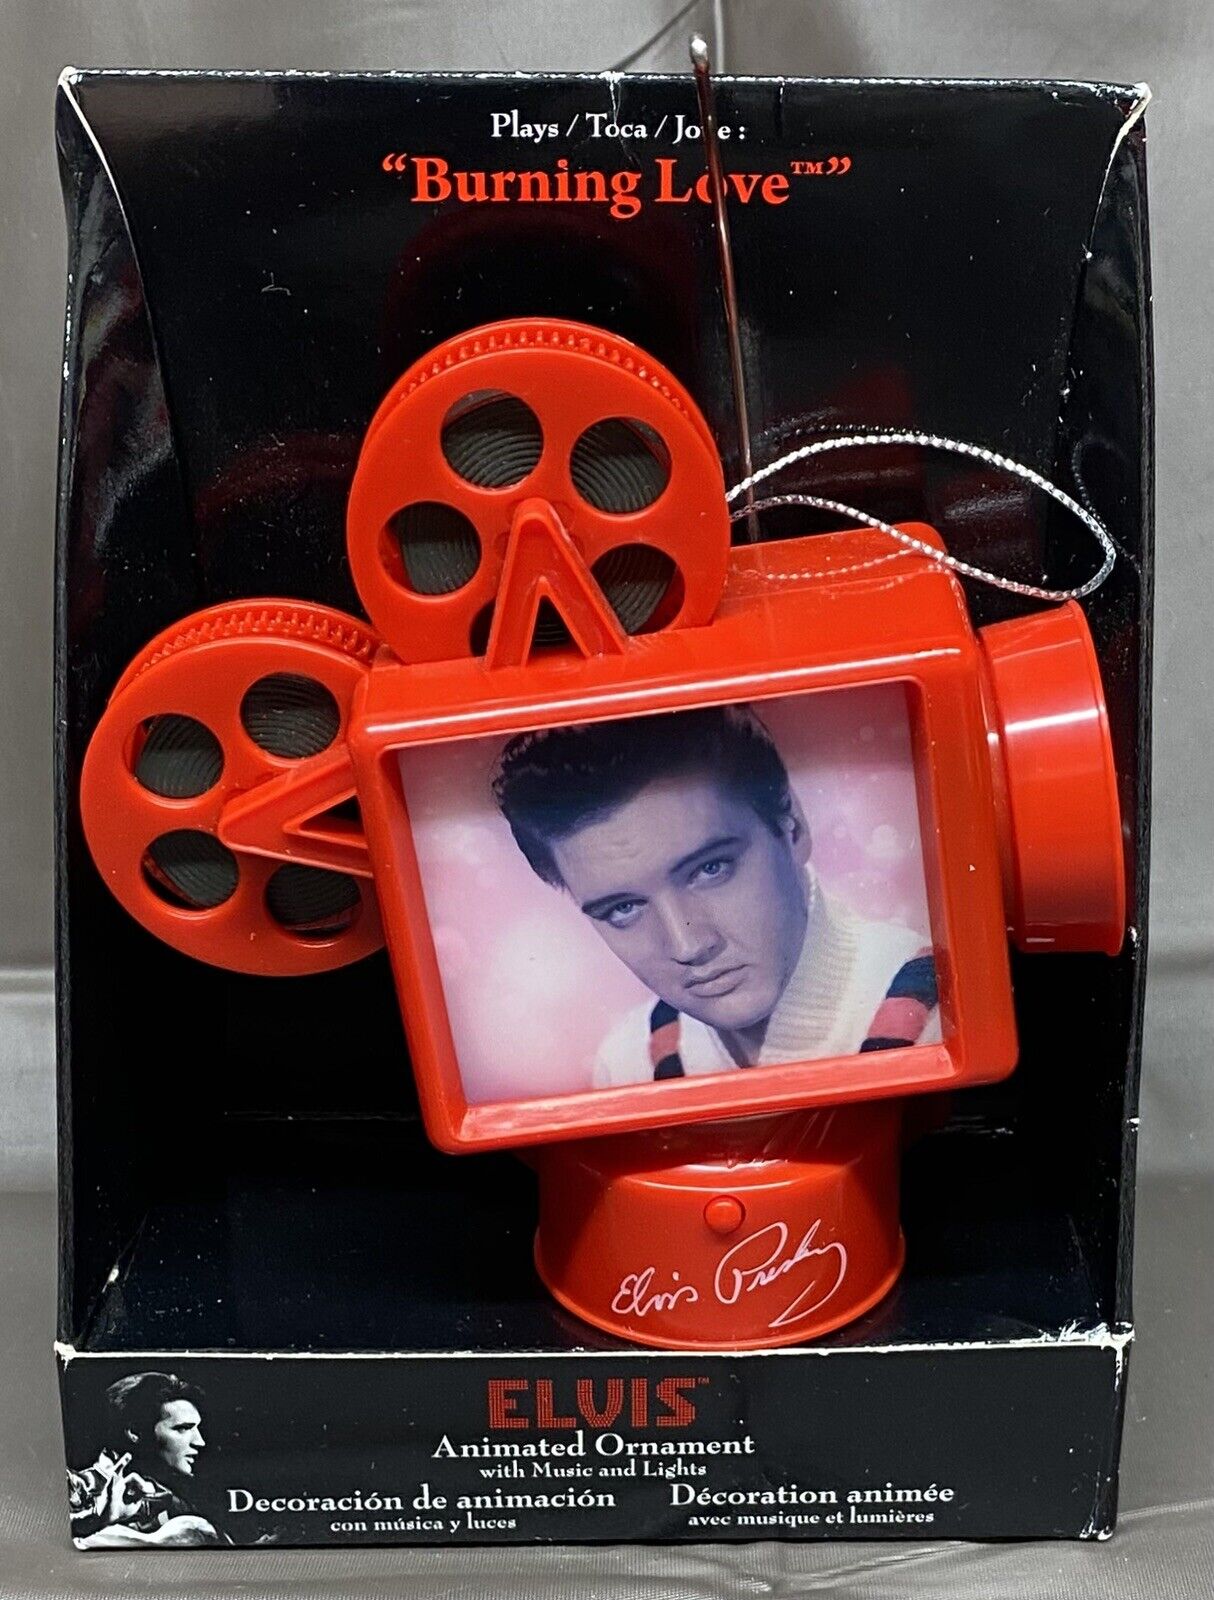 Elvis Presley Projector Animated Ornament Plays Burning Love